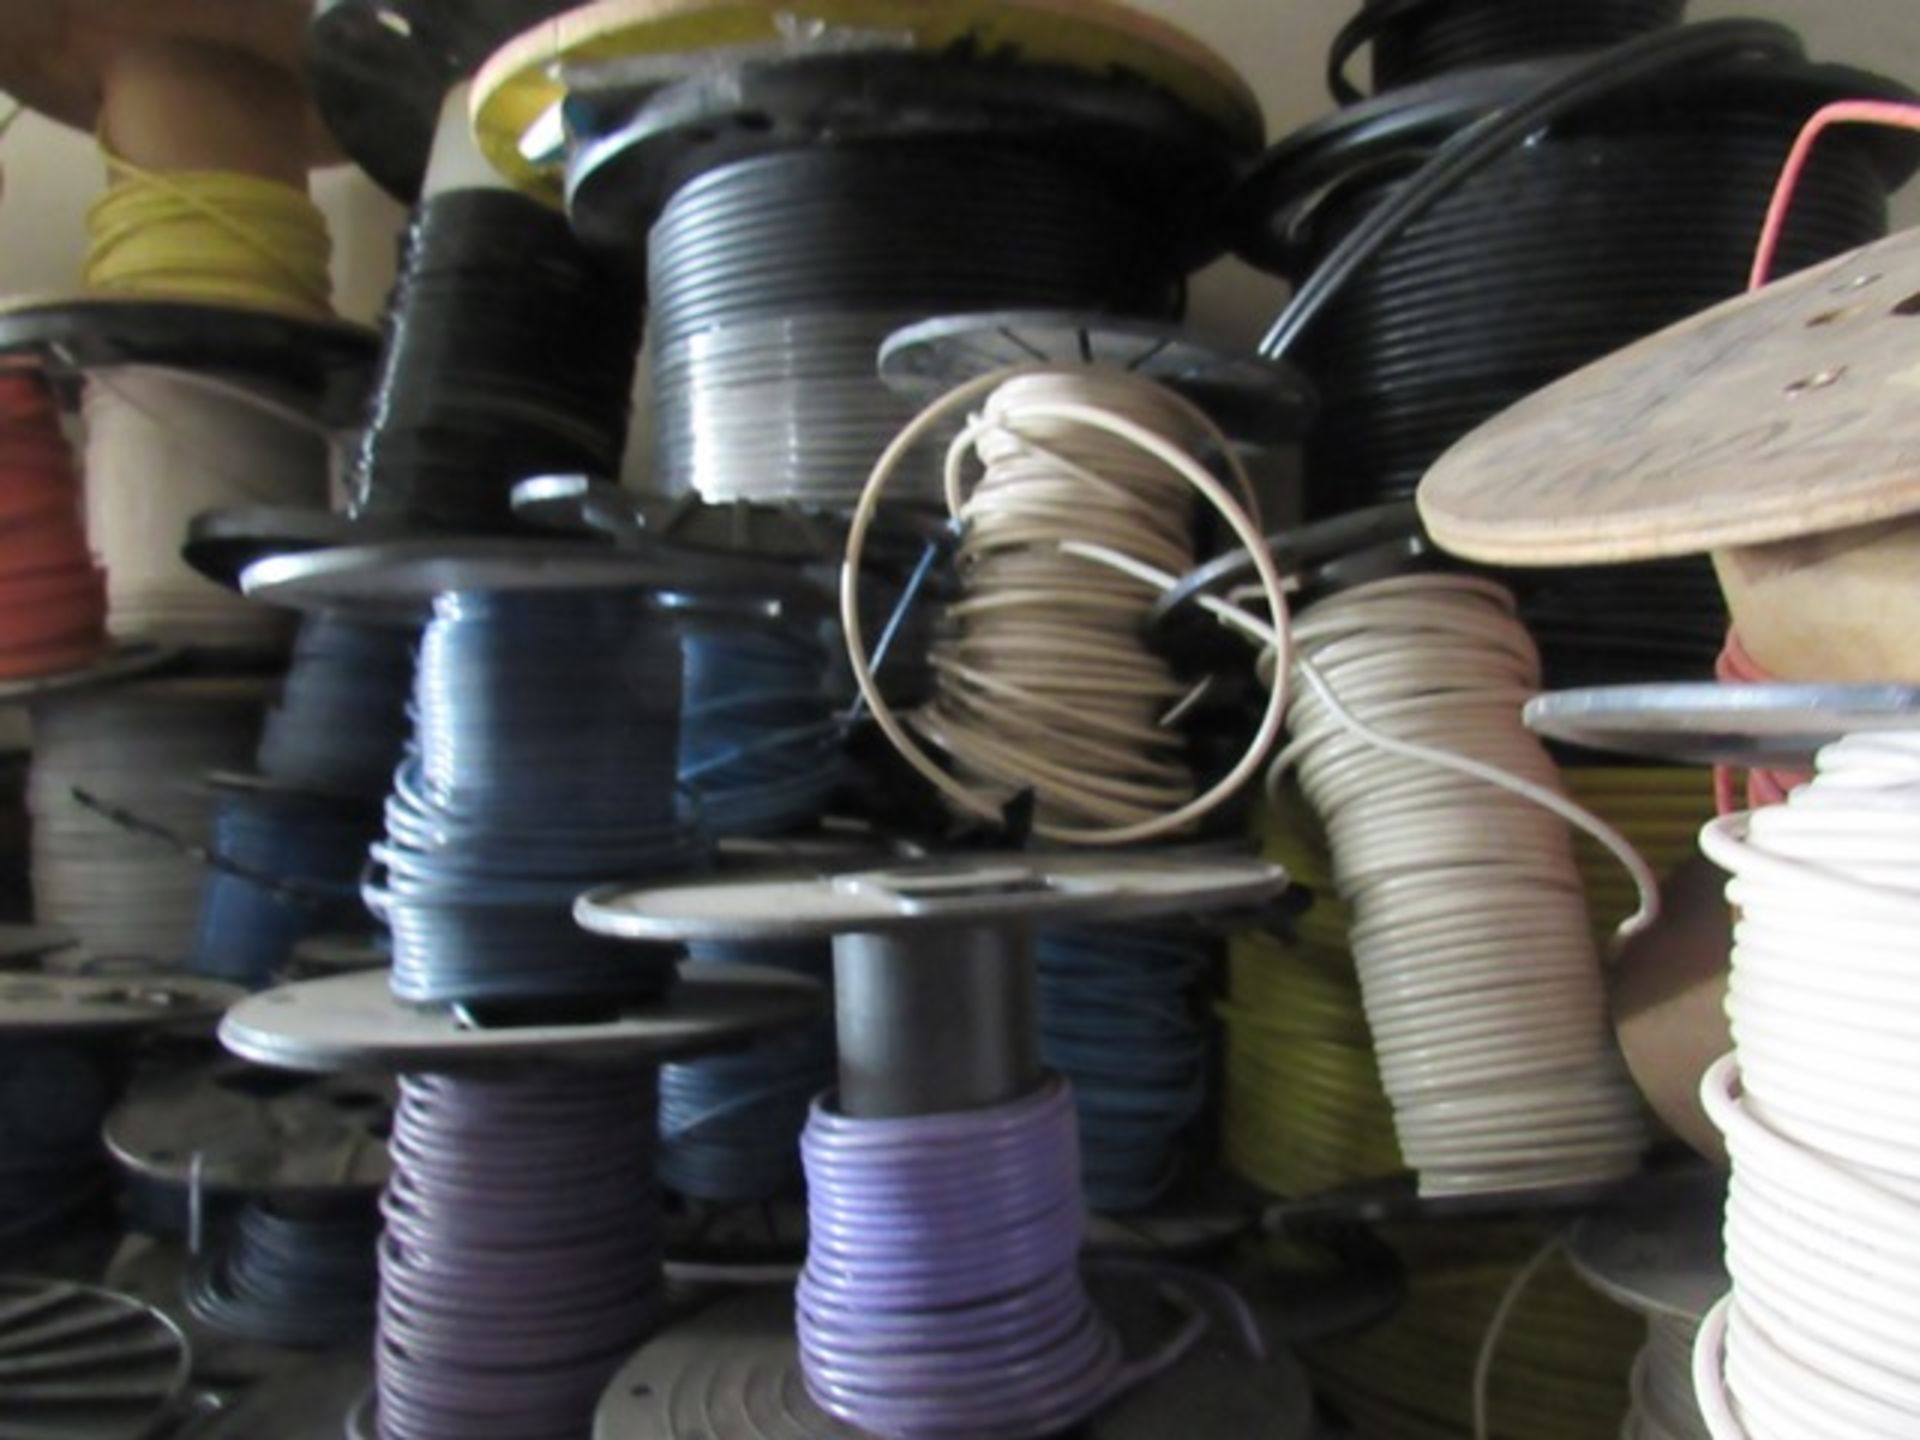 Spools of Electrical Wire - Image 4 of 5